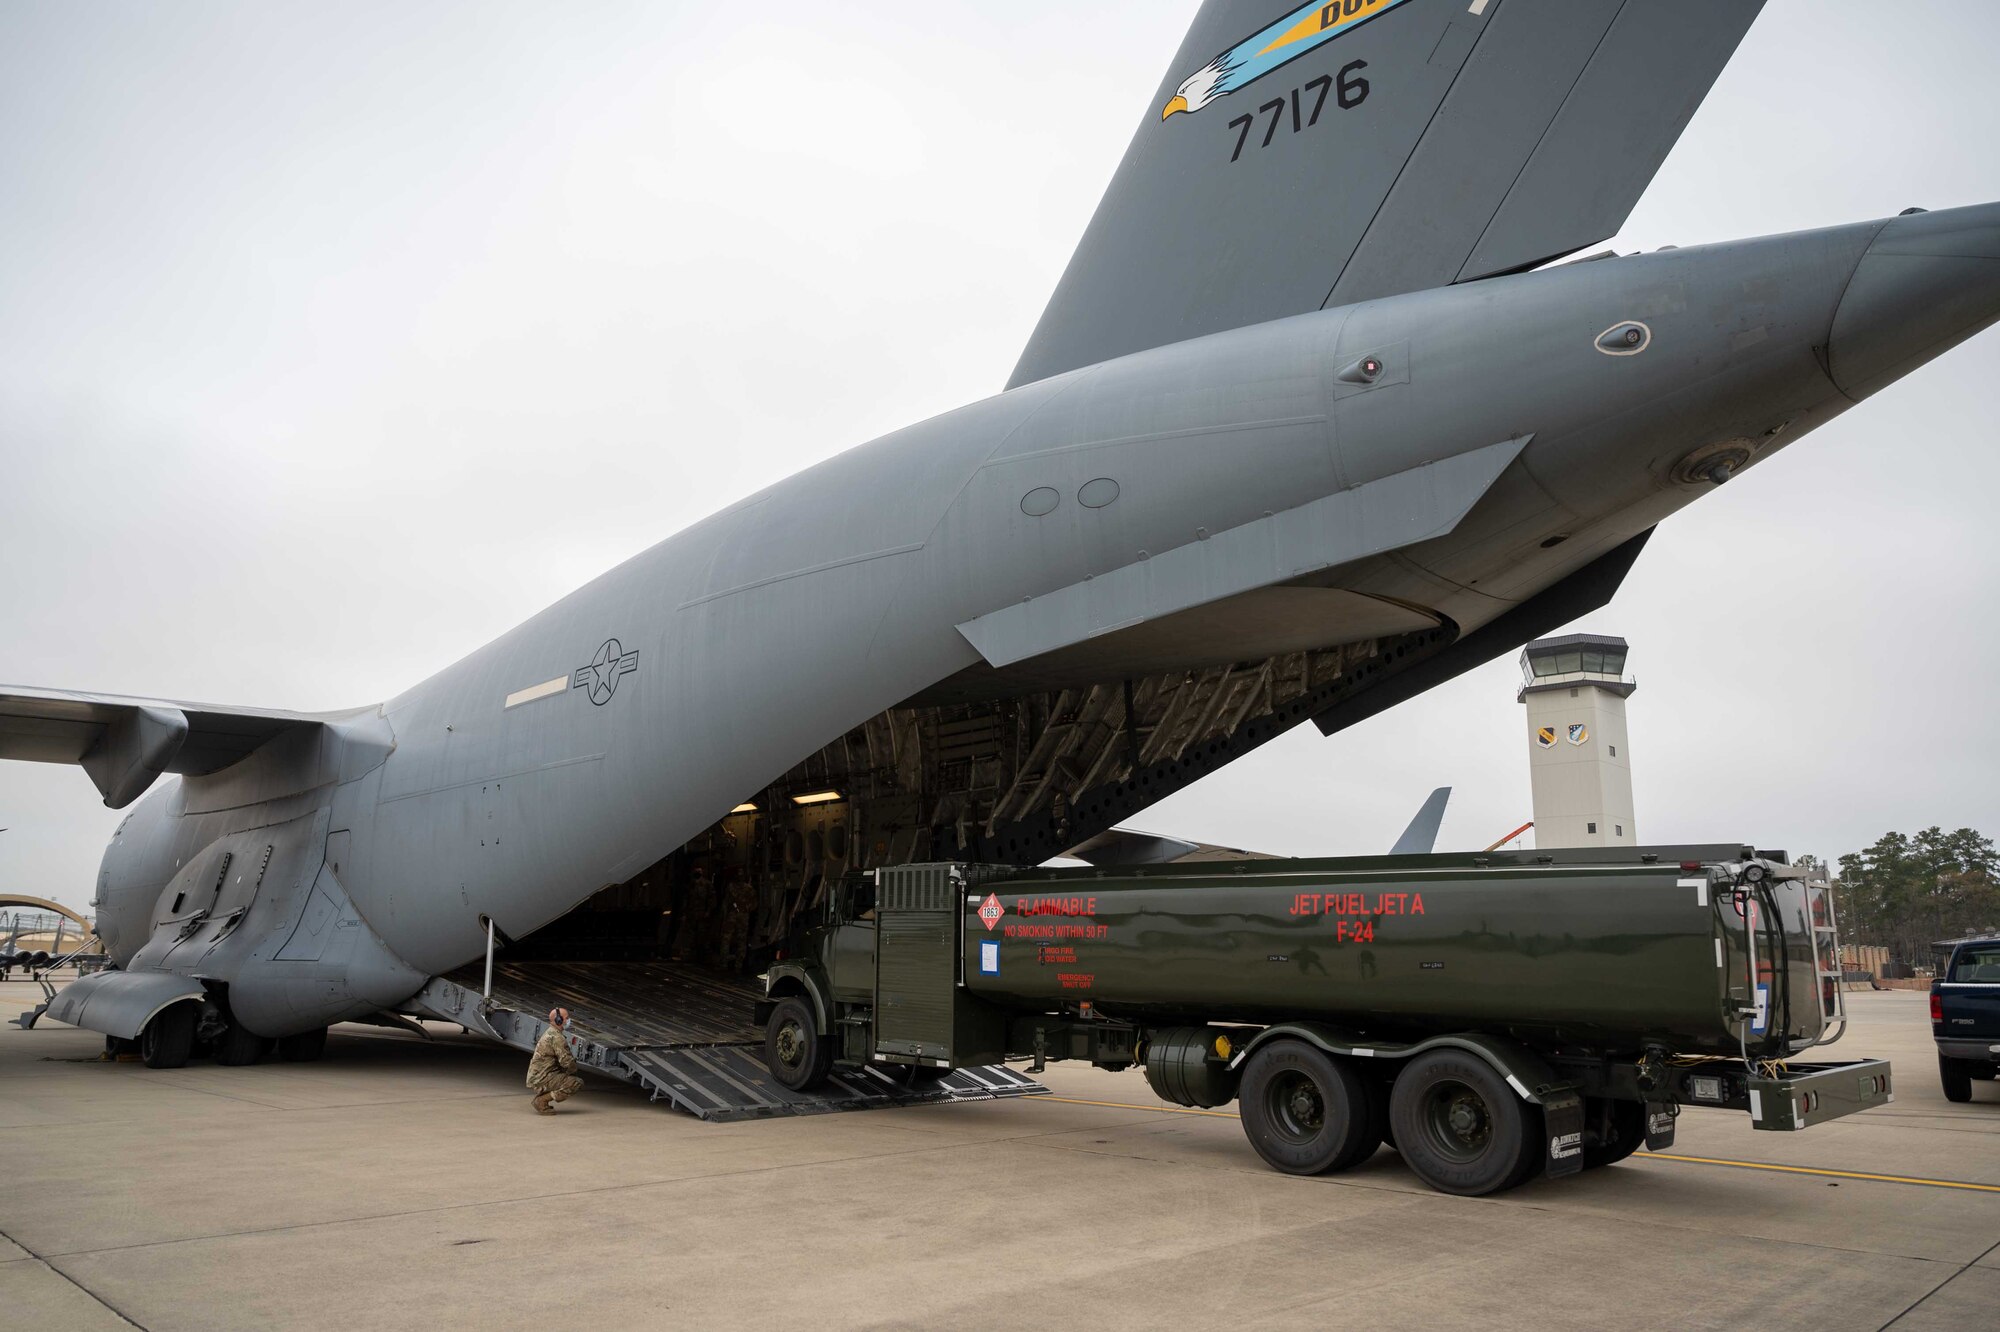 A fuel truck is loaded onto a Dover Air Force Base C-17 Globemaster III during exercise Razor Talon at Seymour Johnson AFB, North Carolina, March 23, 2021. Mobility Airmen participated in exercise Razor Talon to enhance readiness and assist in implementation of the Agile Combat Employment concept across the Air Force. (U.S. Air Force photo by Airman 1st Class Faith Schaefer)